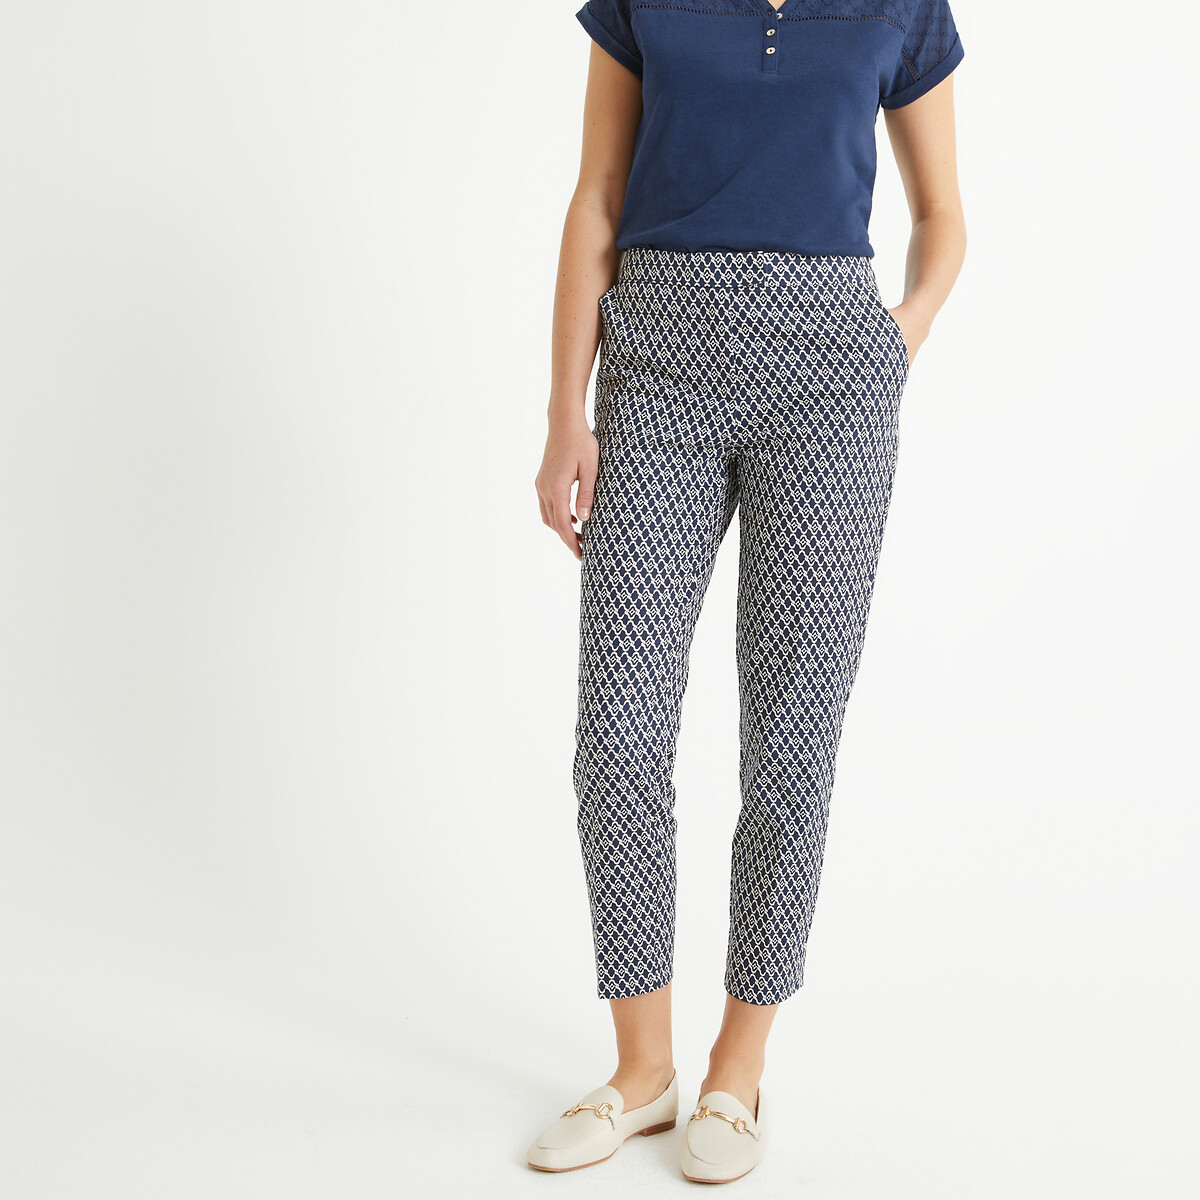 Image of Graphic Print Peg Trousers in Cotton, Length 26.5"